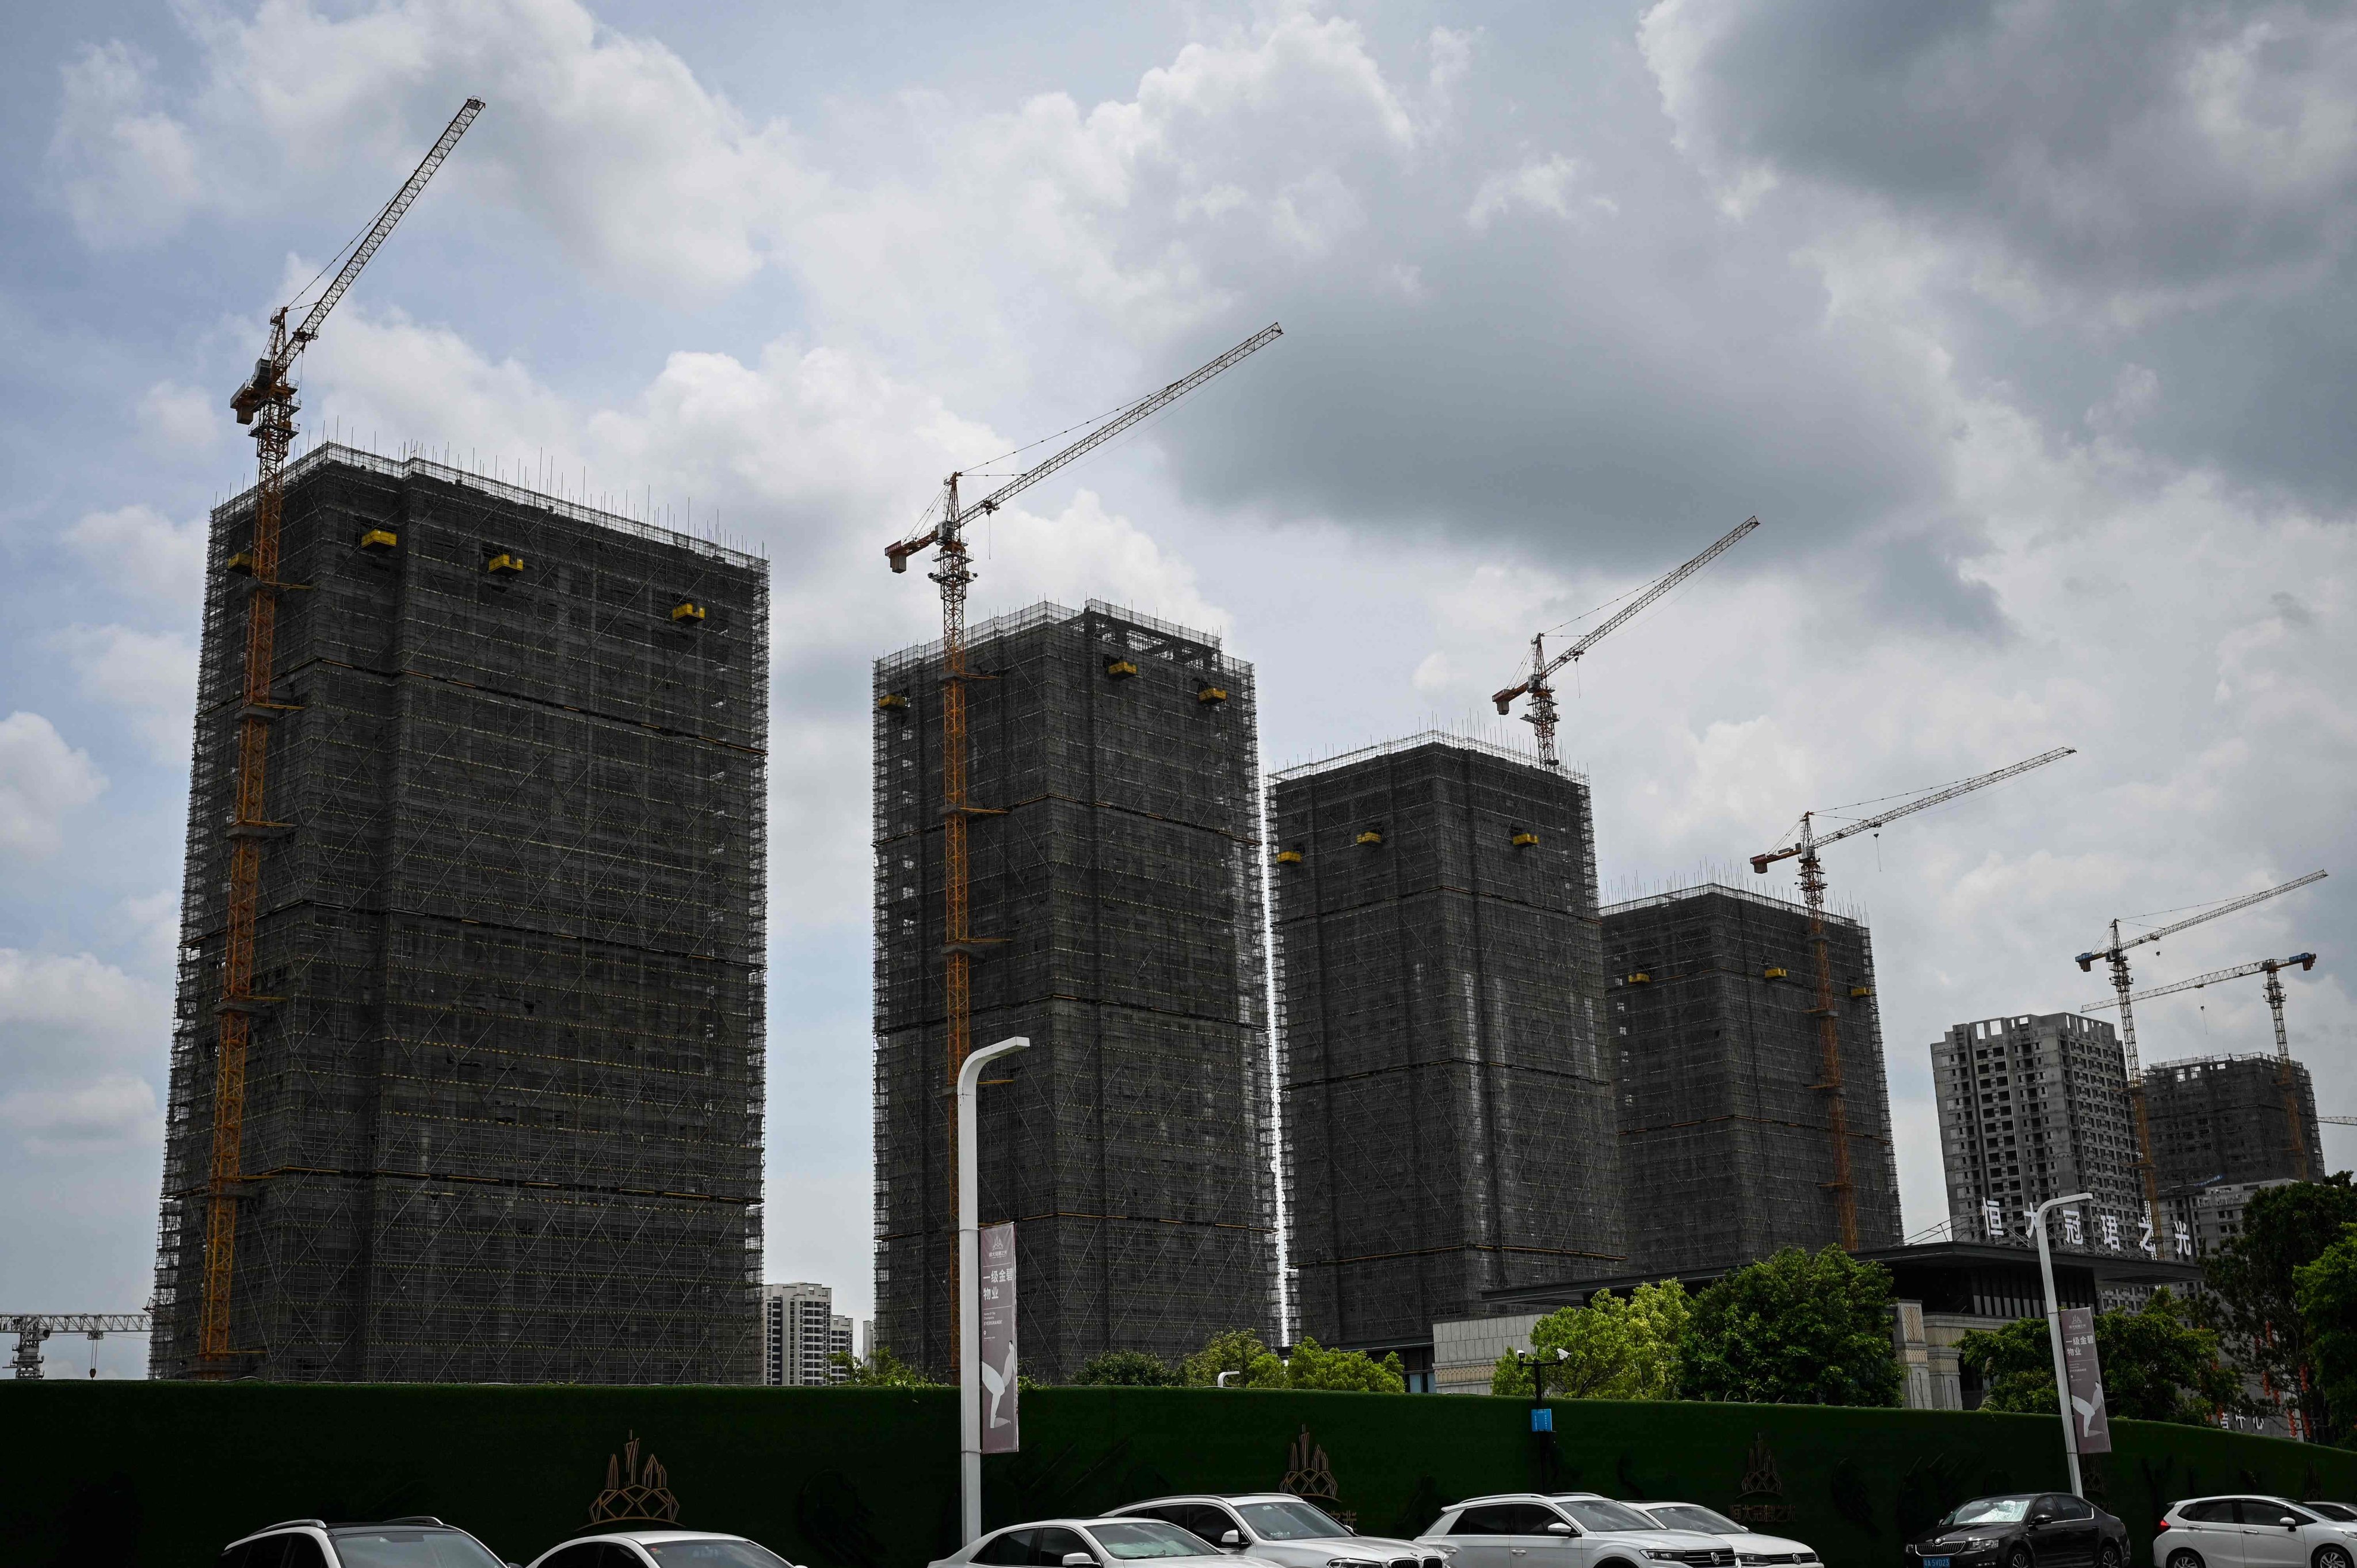 Residential buildings under construction in Guangzhou on July 18. Infrastructure investment is a central part of China’s attempt to revive slowing growth, but returns on that investment are not as good as in previous decades. Photo: AFP